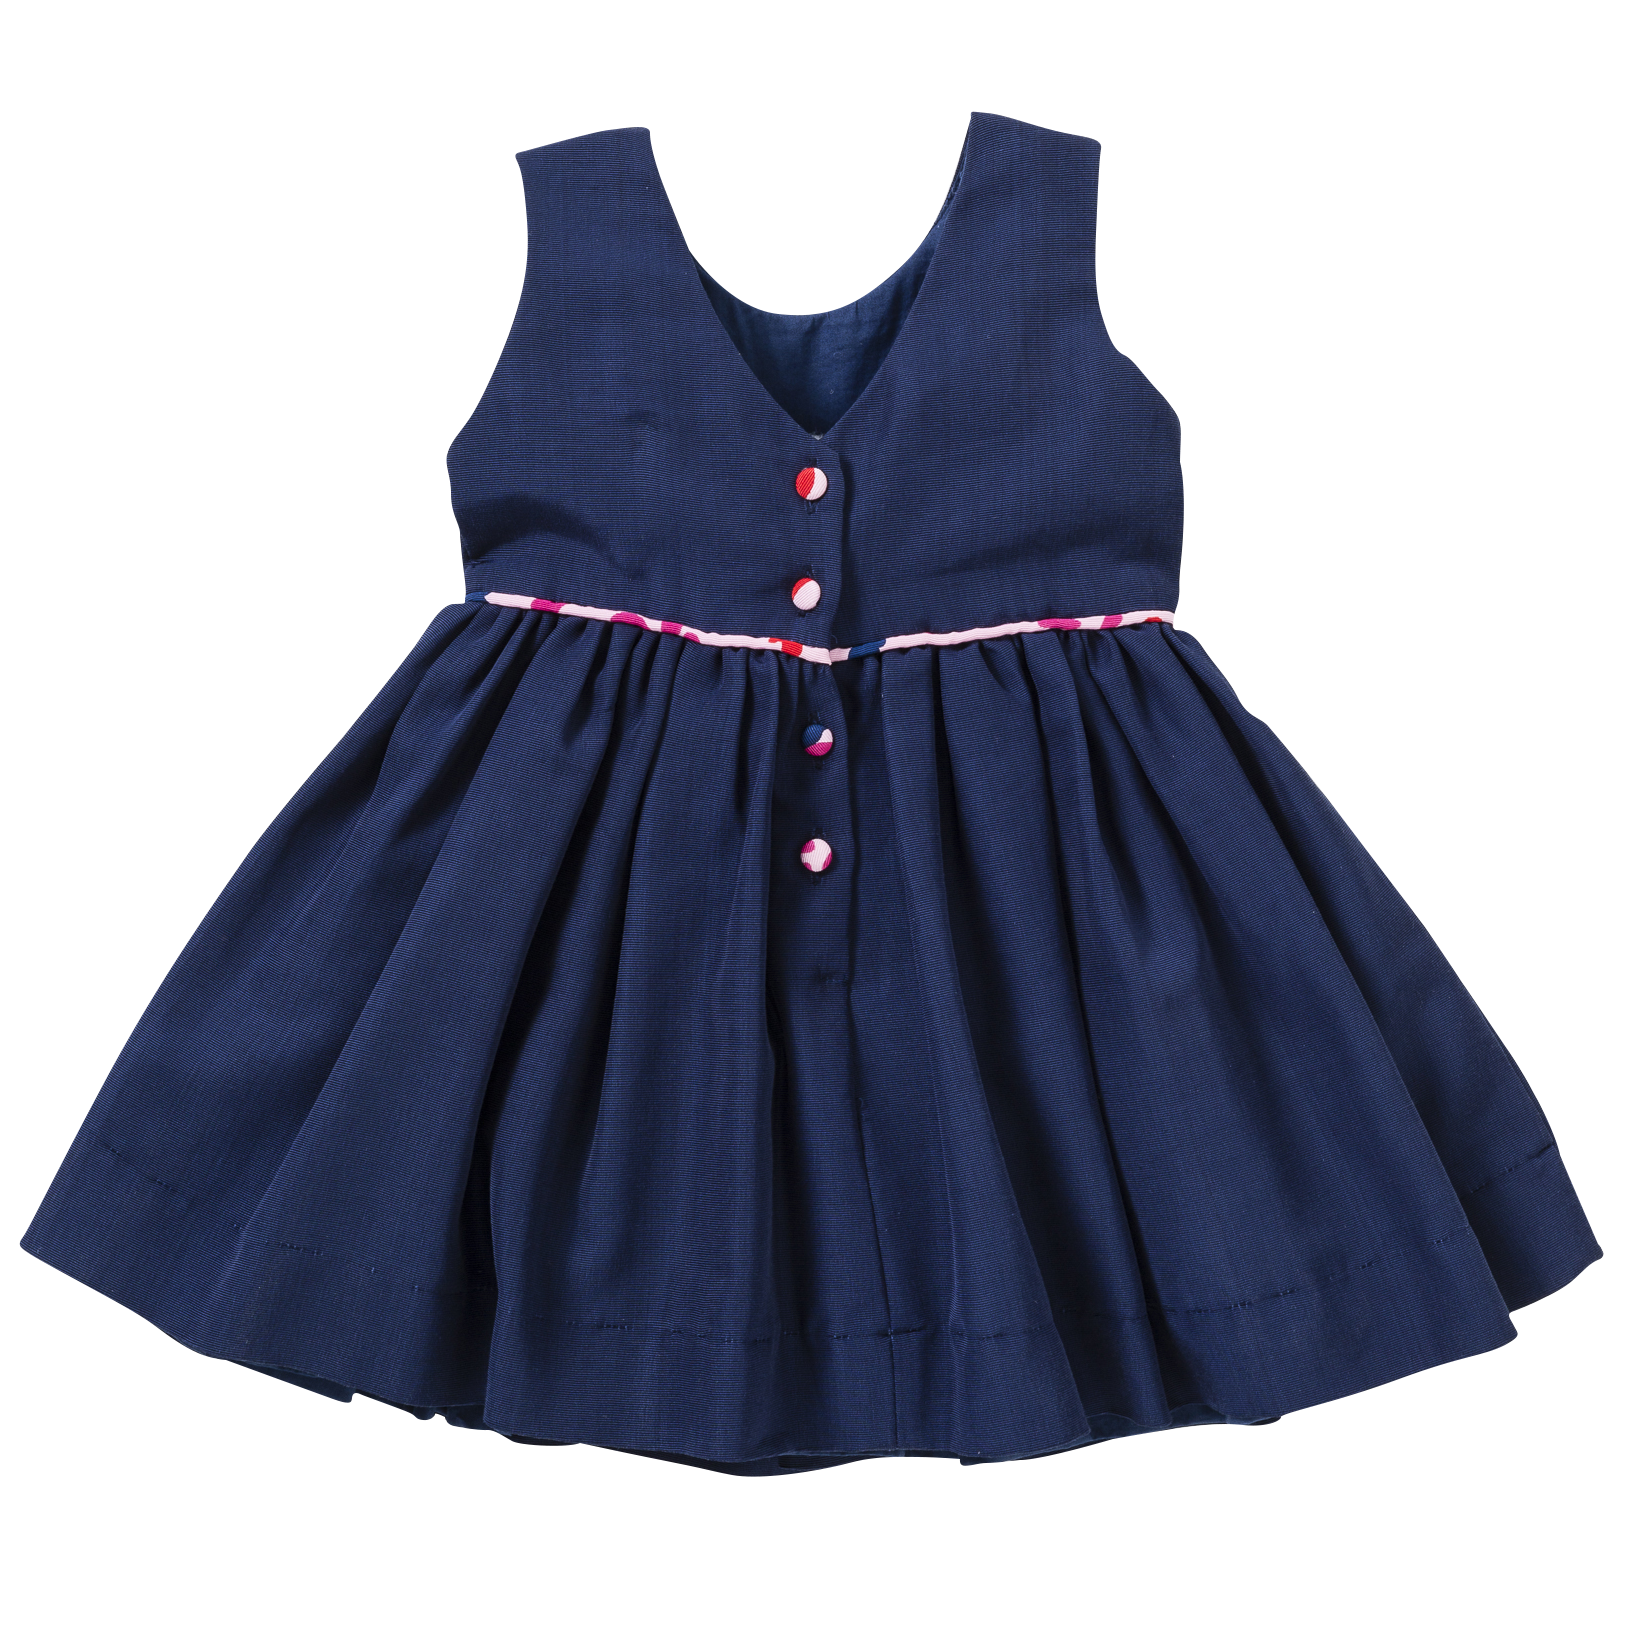 The Bow Dress in Navy